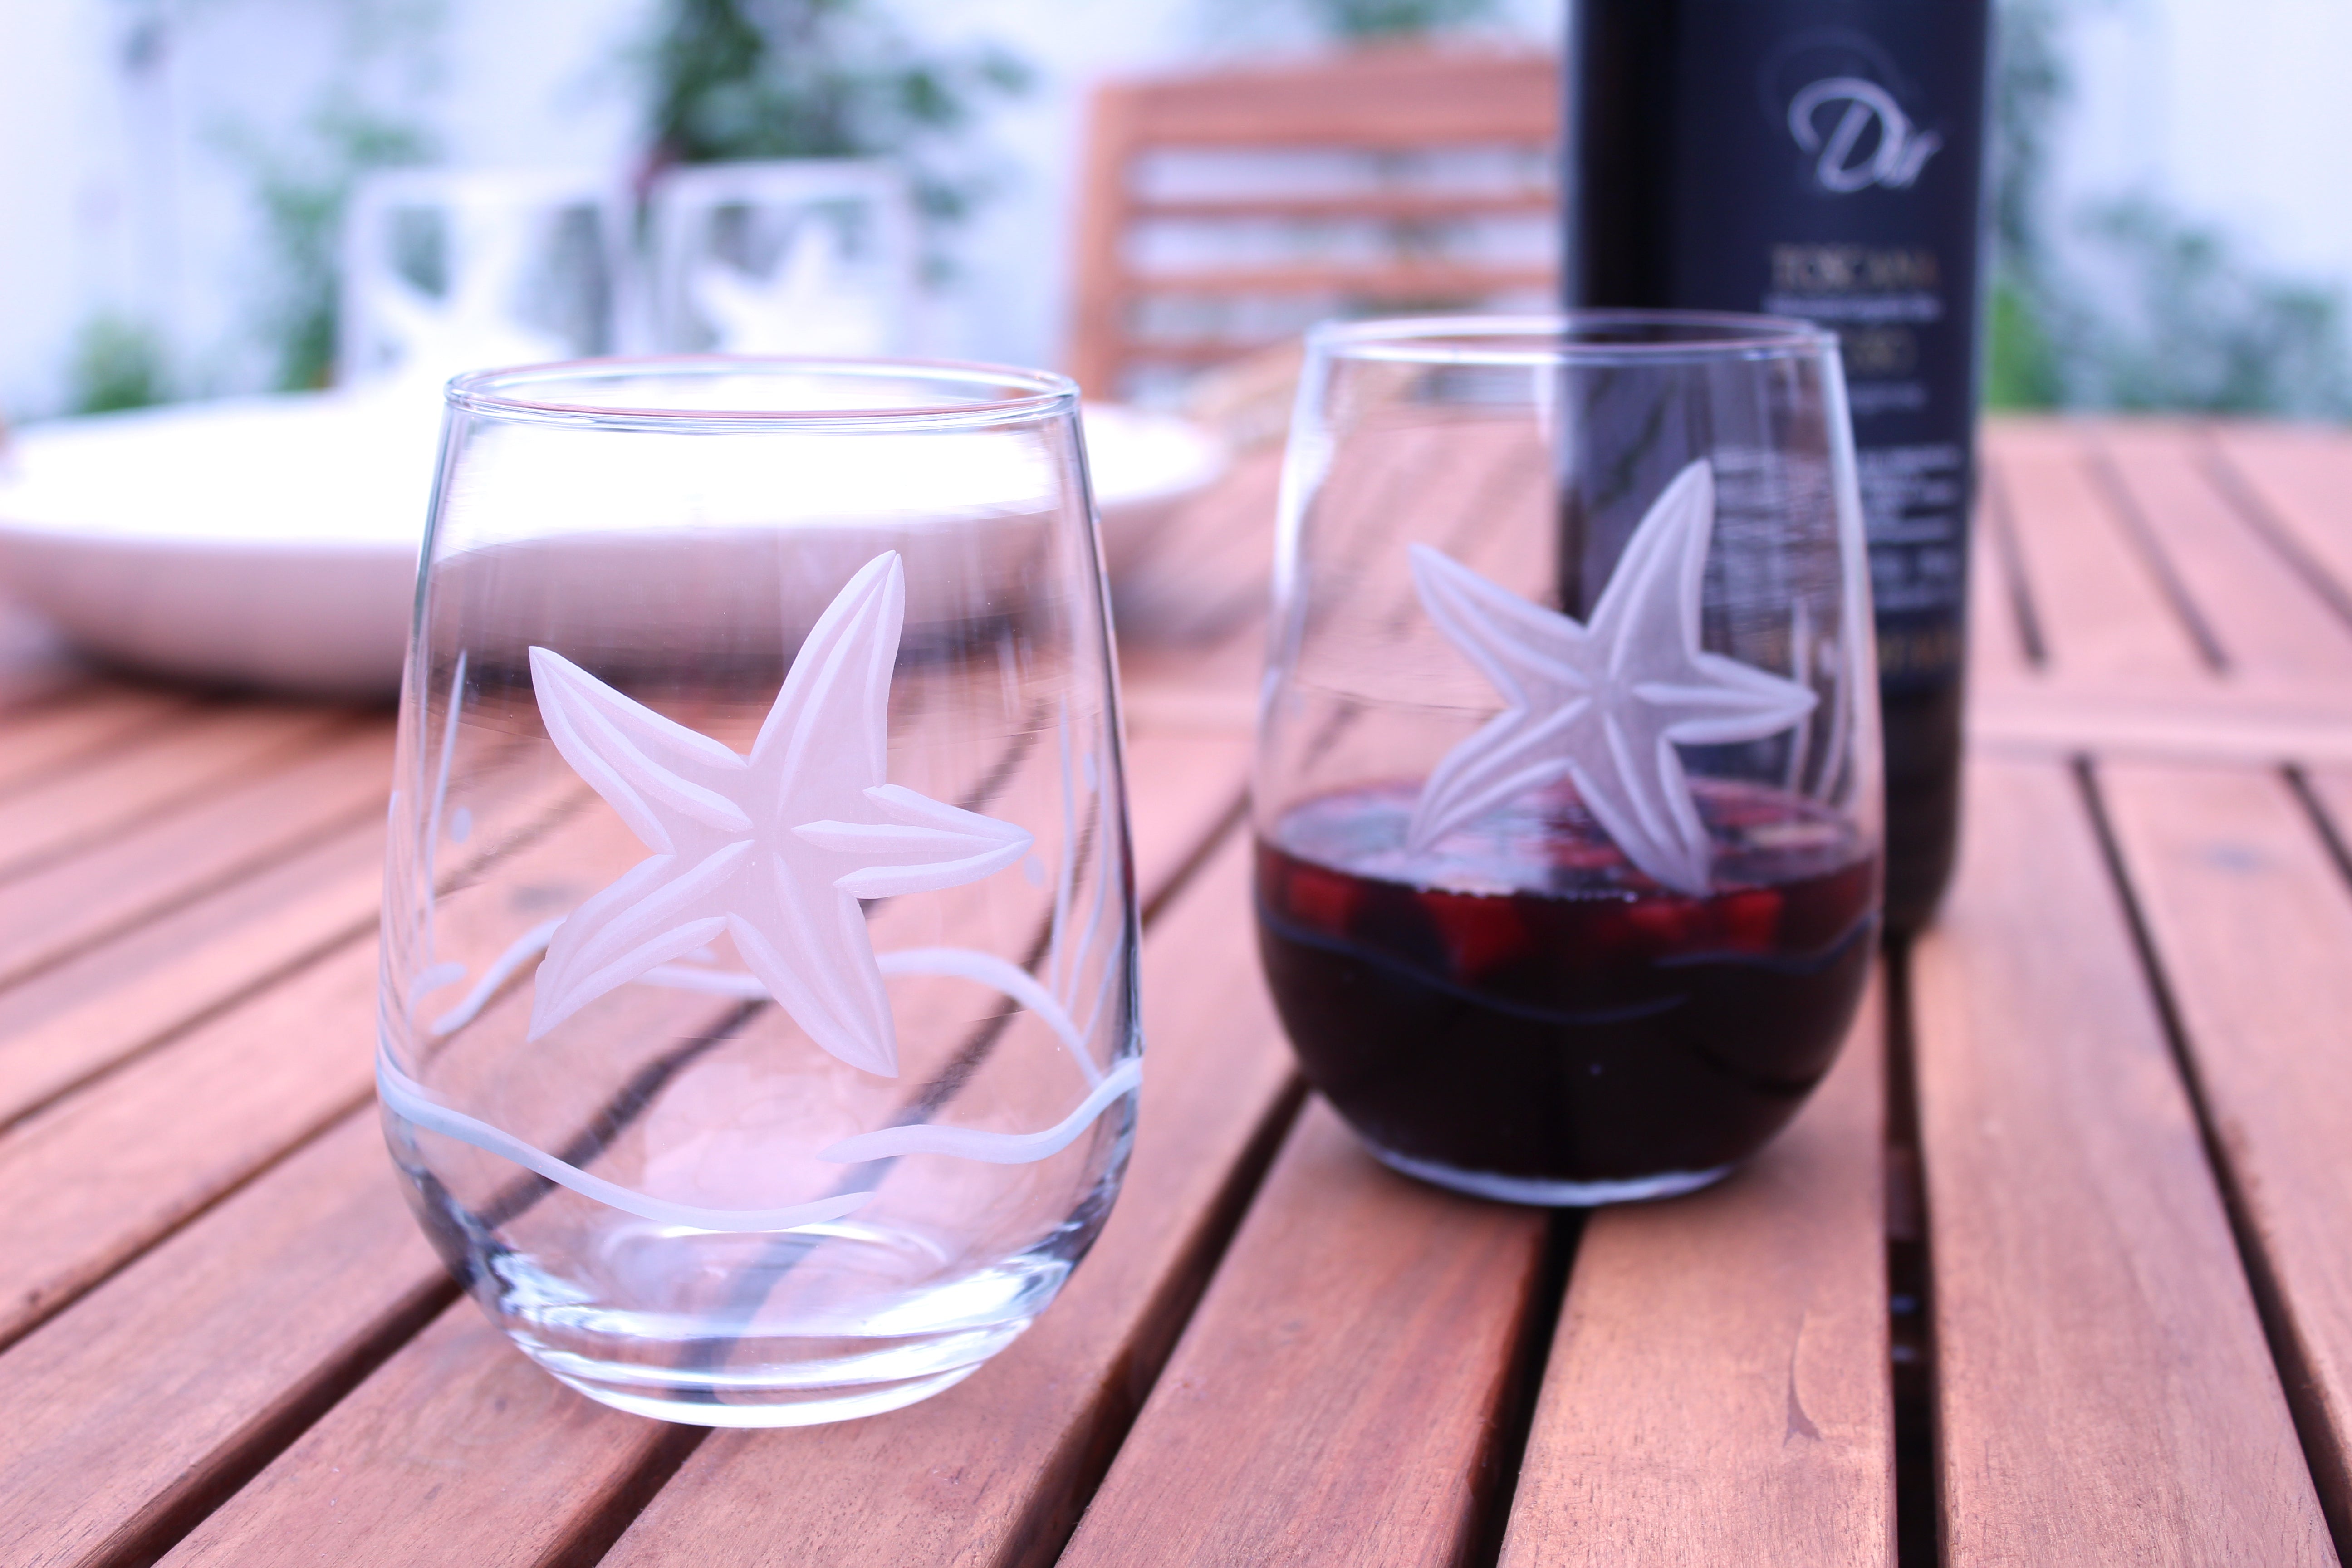 Stemless Wine Glass 17oz His and Hers Set of 2 